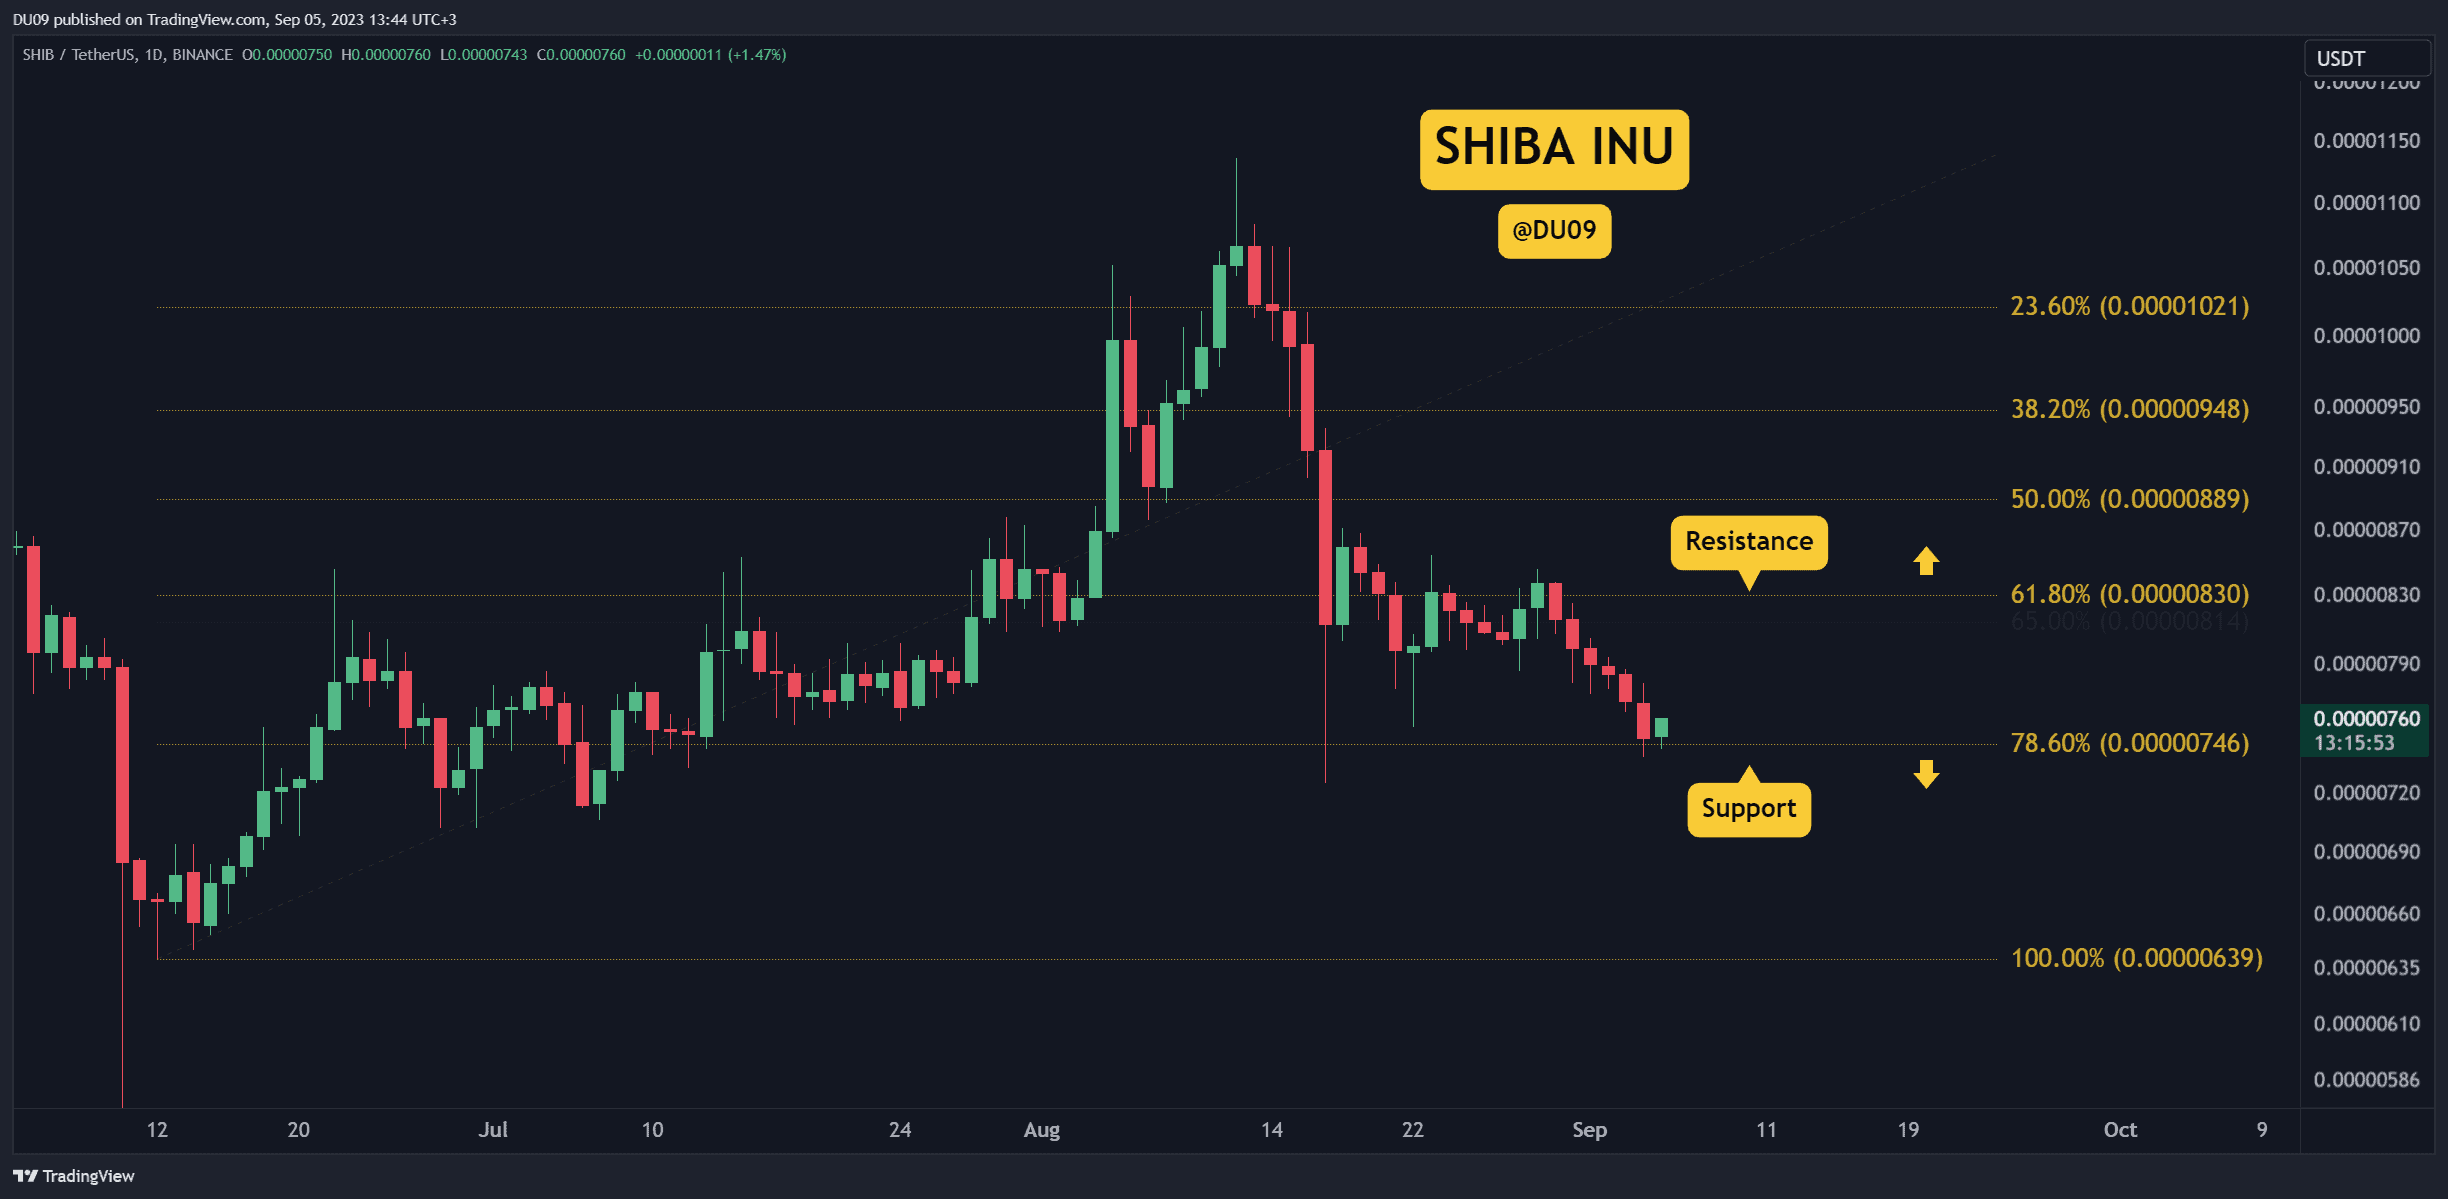 Recovery Rally or Another Crash for SHIB? 3 Things to Watch This Week (Shiba Inu Price Analysis)